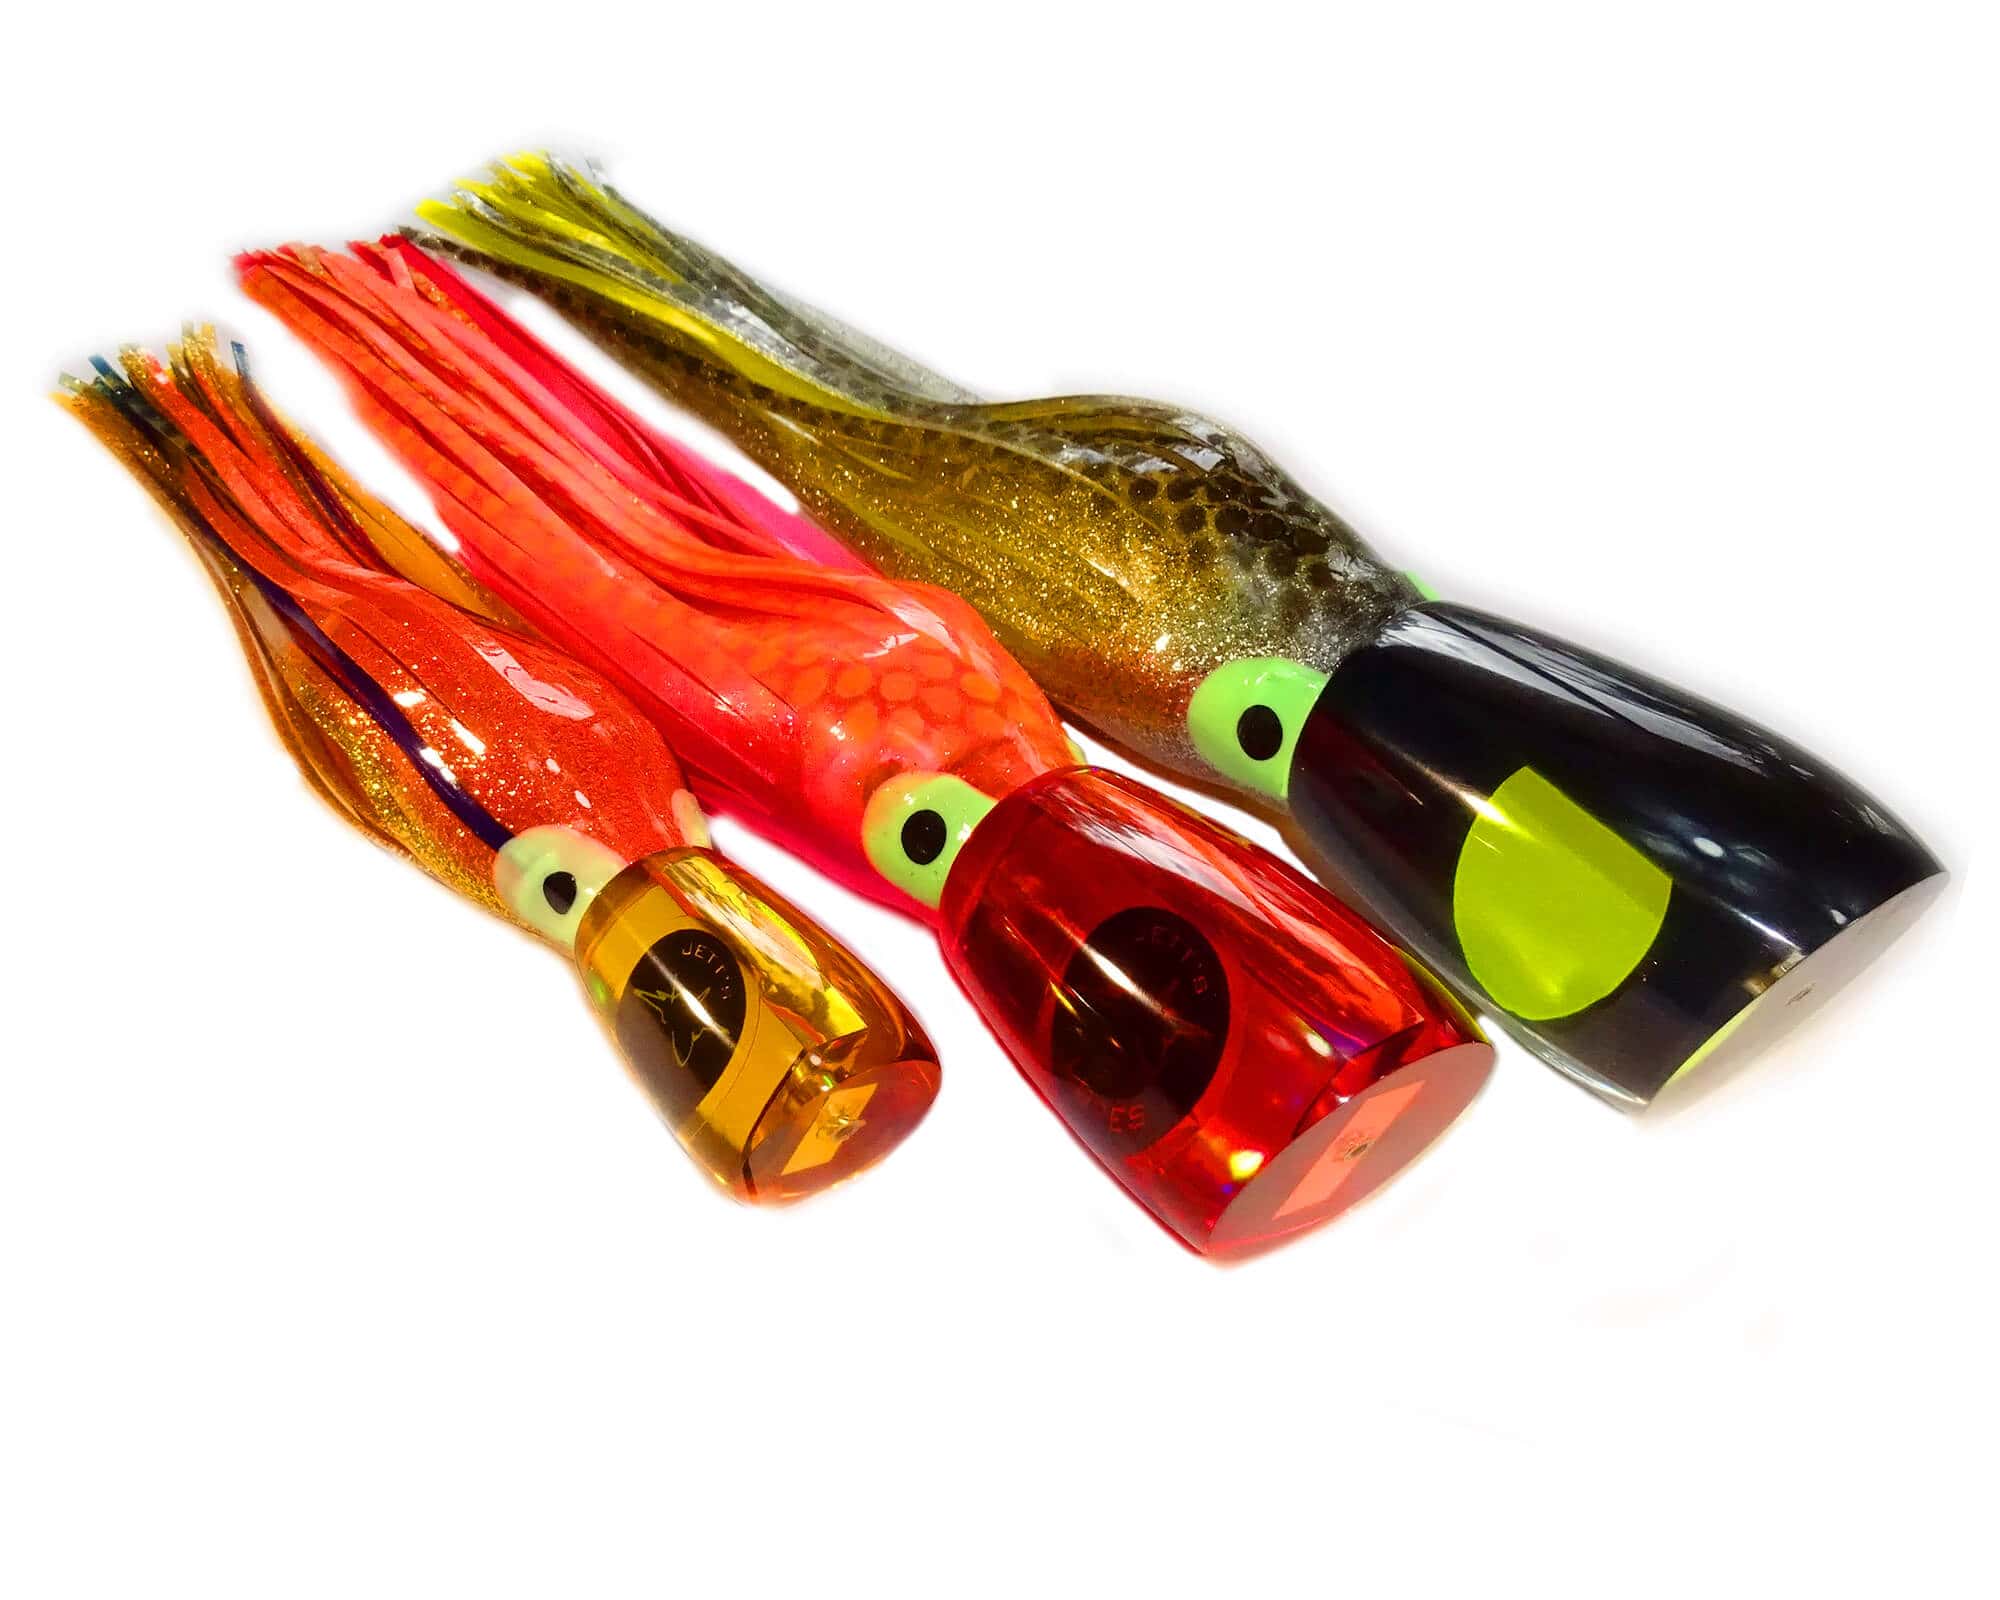 Jetts Lures - Mental Series - Marlin and Tuna Lures